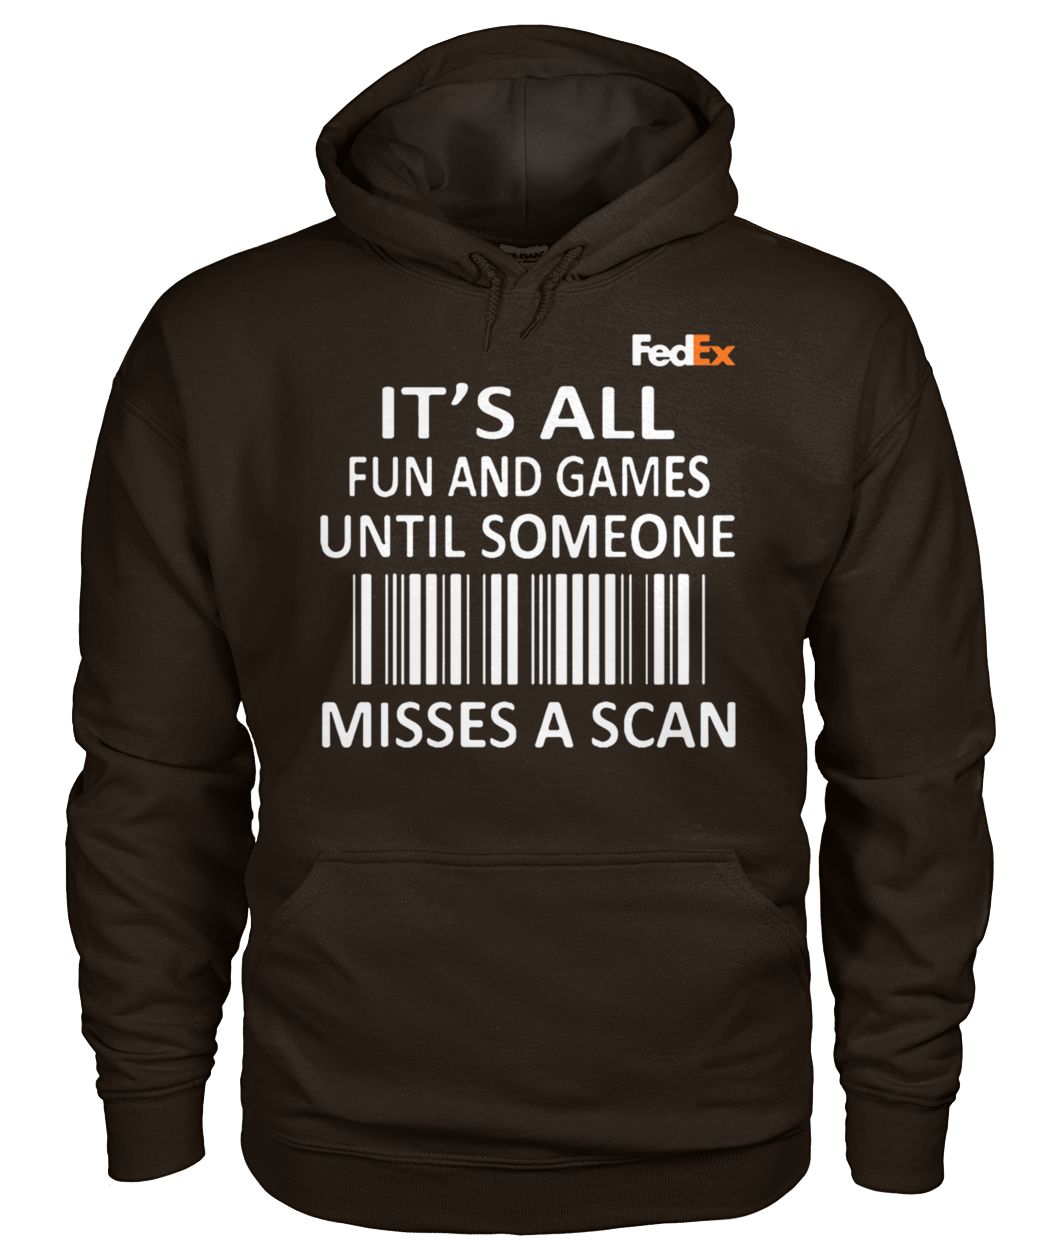 FedEx it’s all fun and games until someone misses a scan hoodie